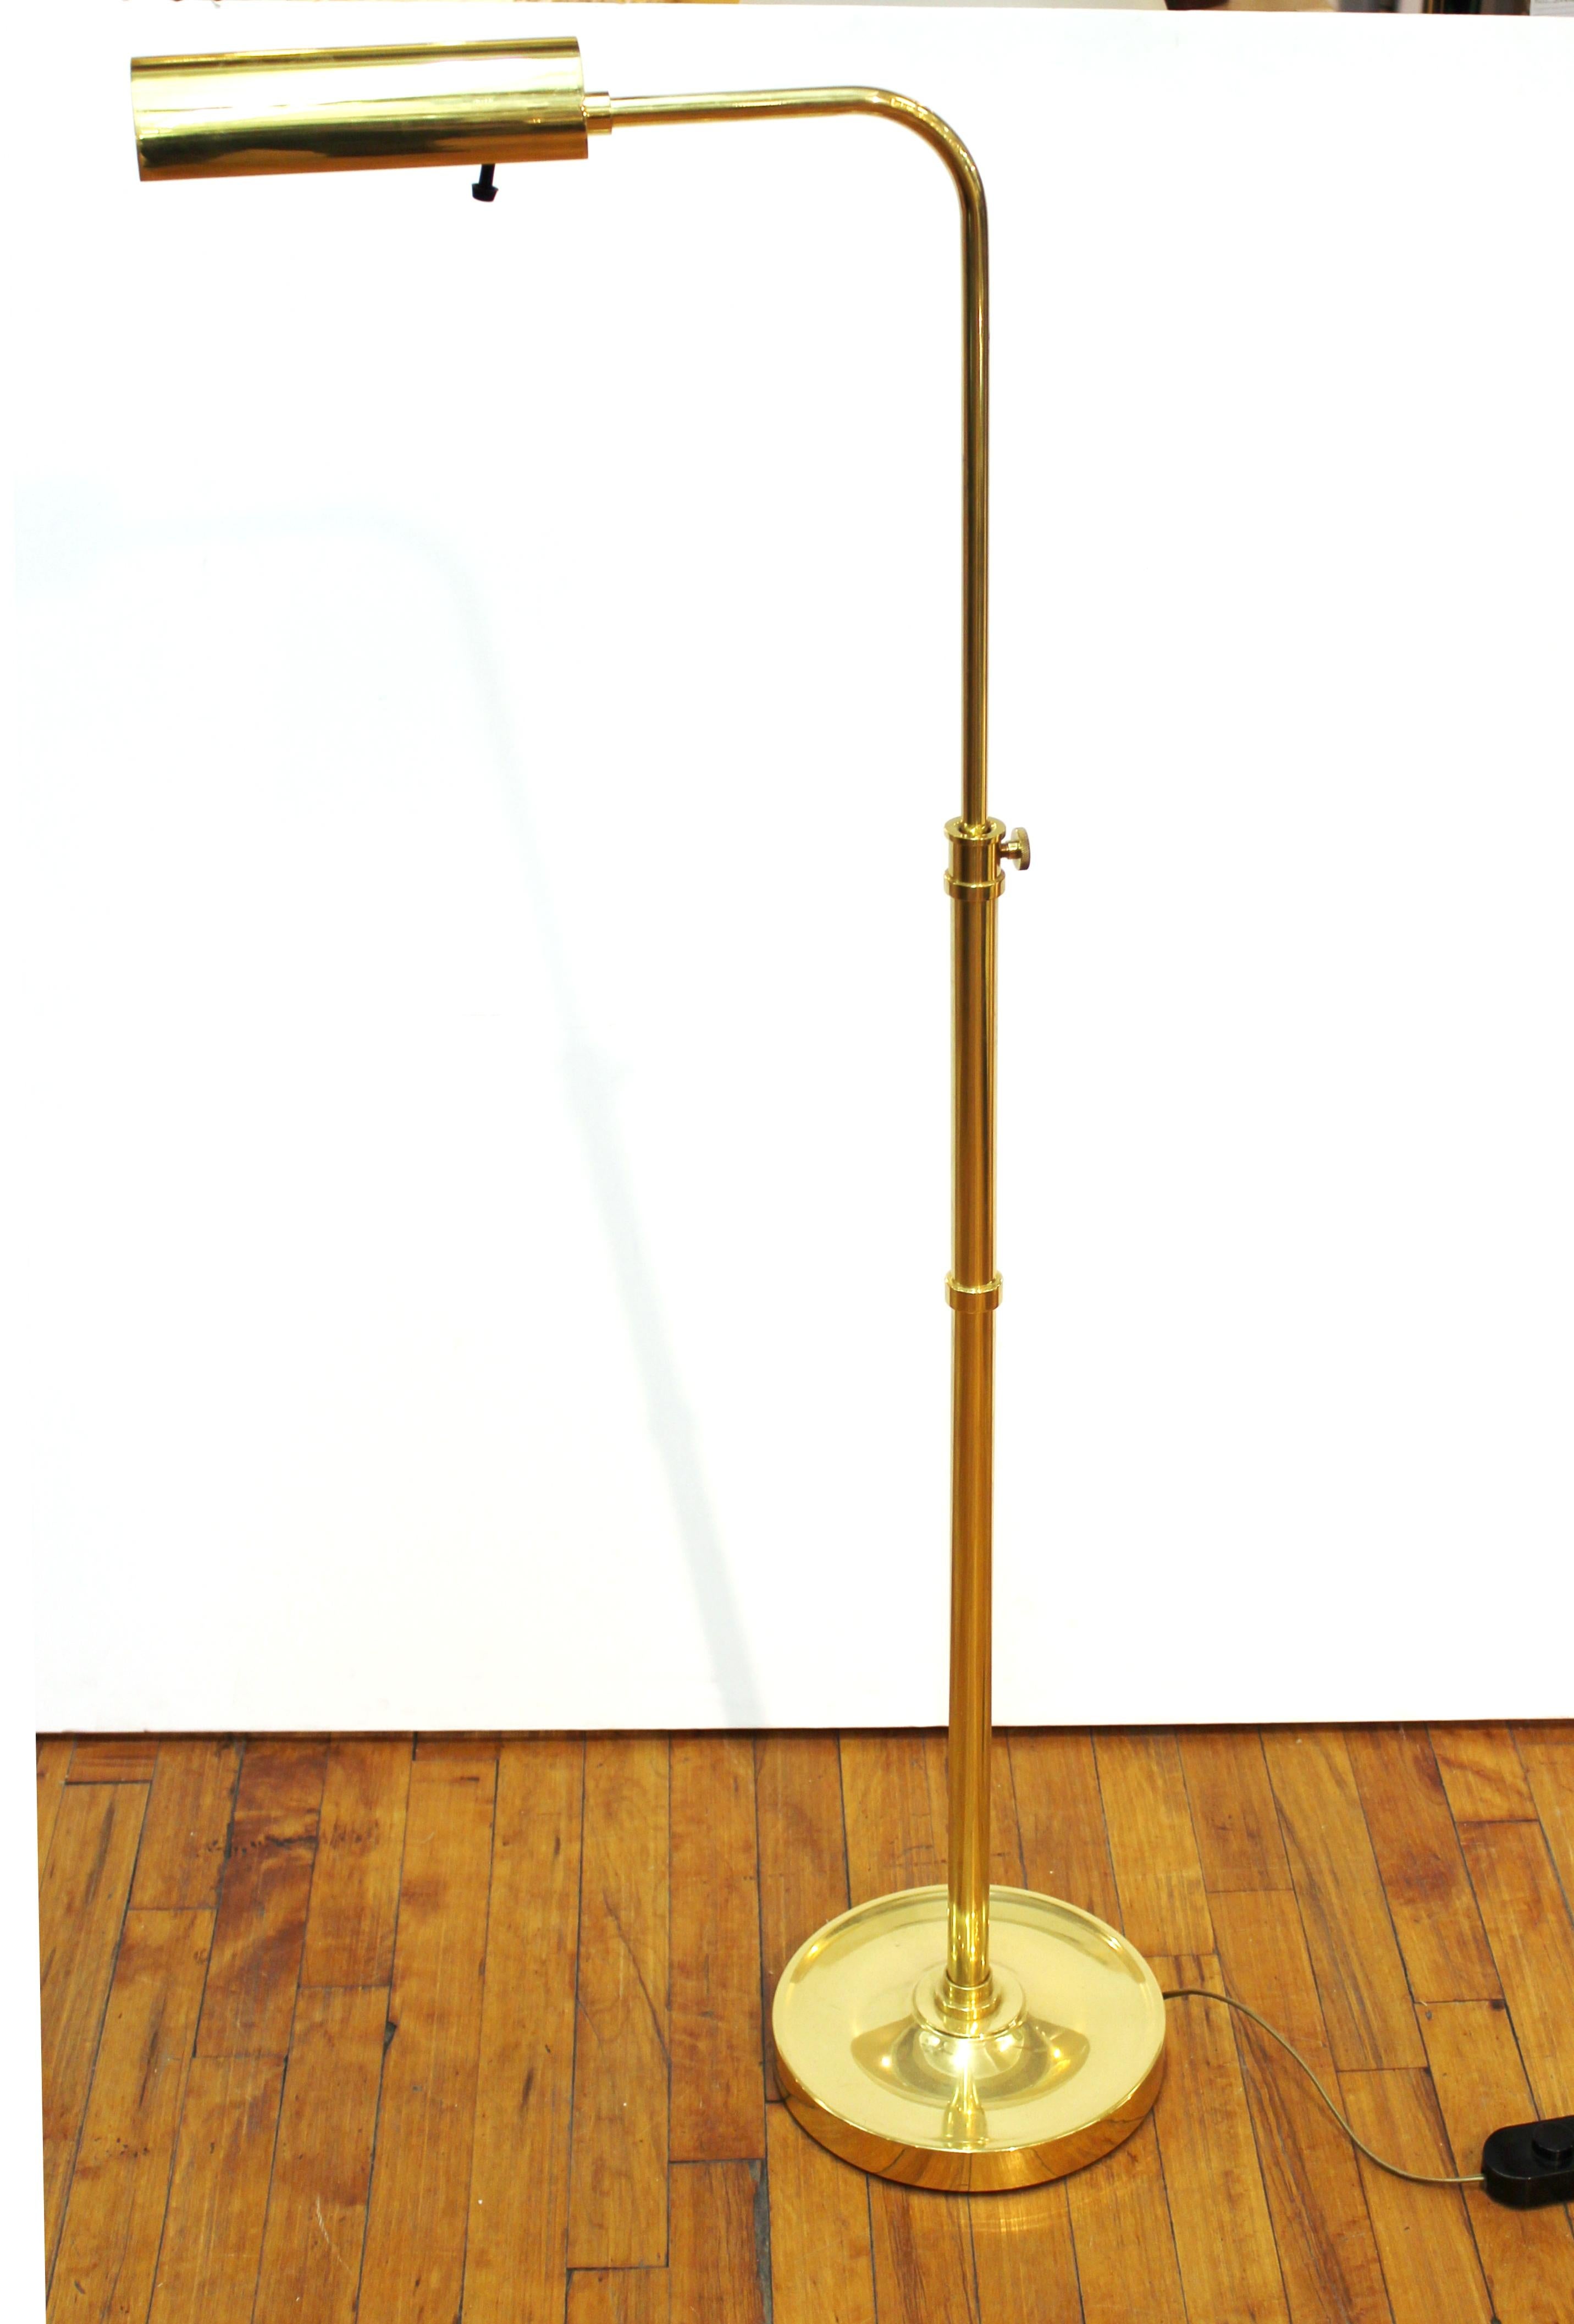 Modern brass floor lamp or reading lamp with extendable height.
Removed from a private residence at the Pierre Hotel in New York City.